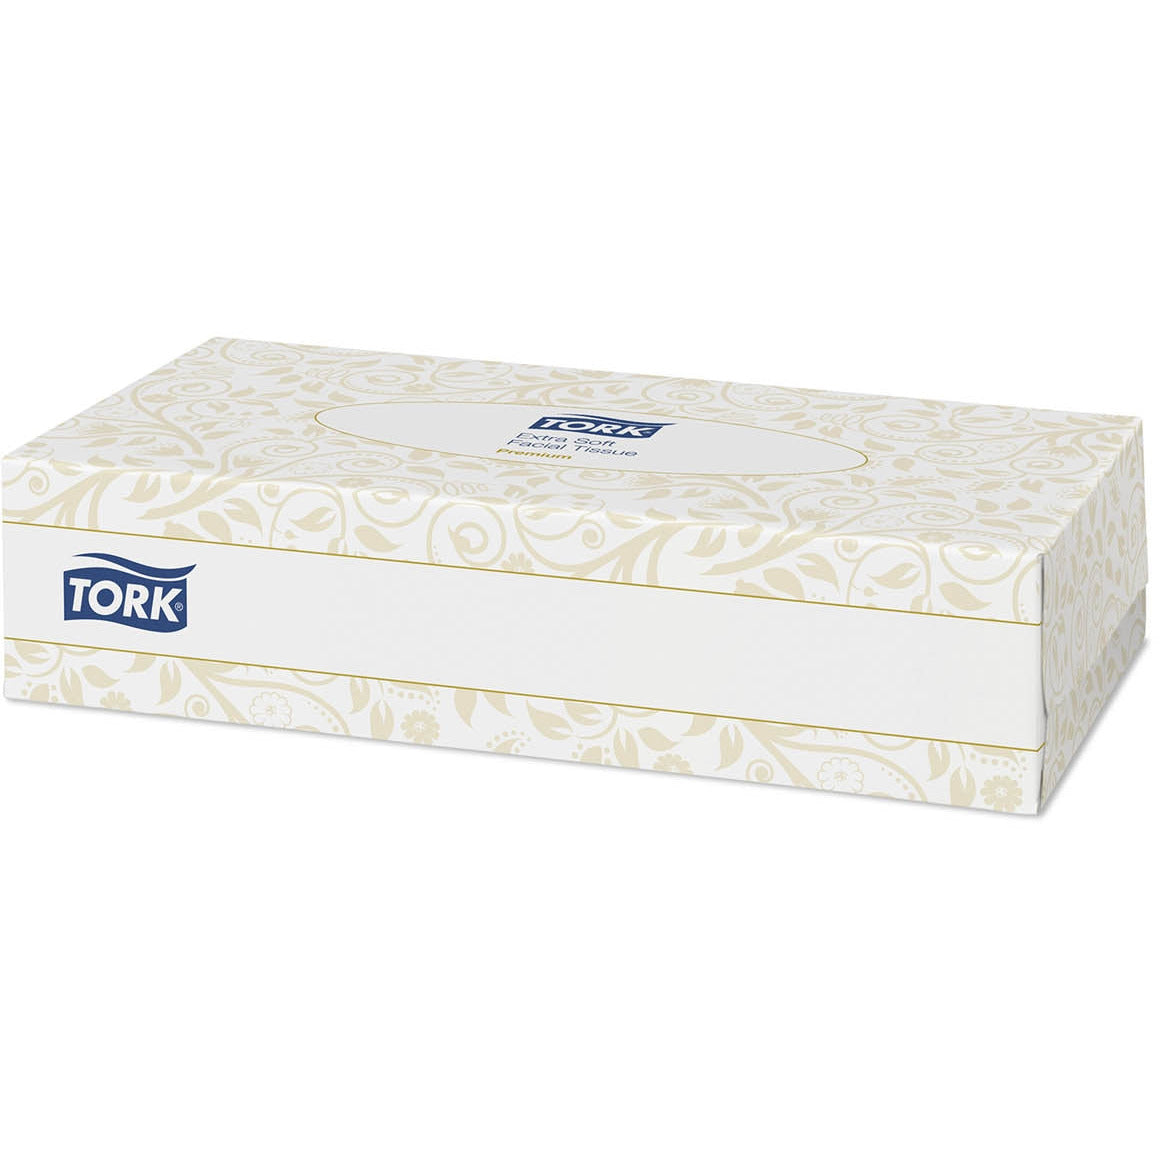 Tork Extra Soft Facial Tissues Premium 2Ply - 476417 - 24 Boxes x 100 Sheets